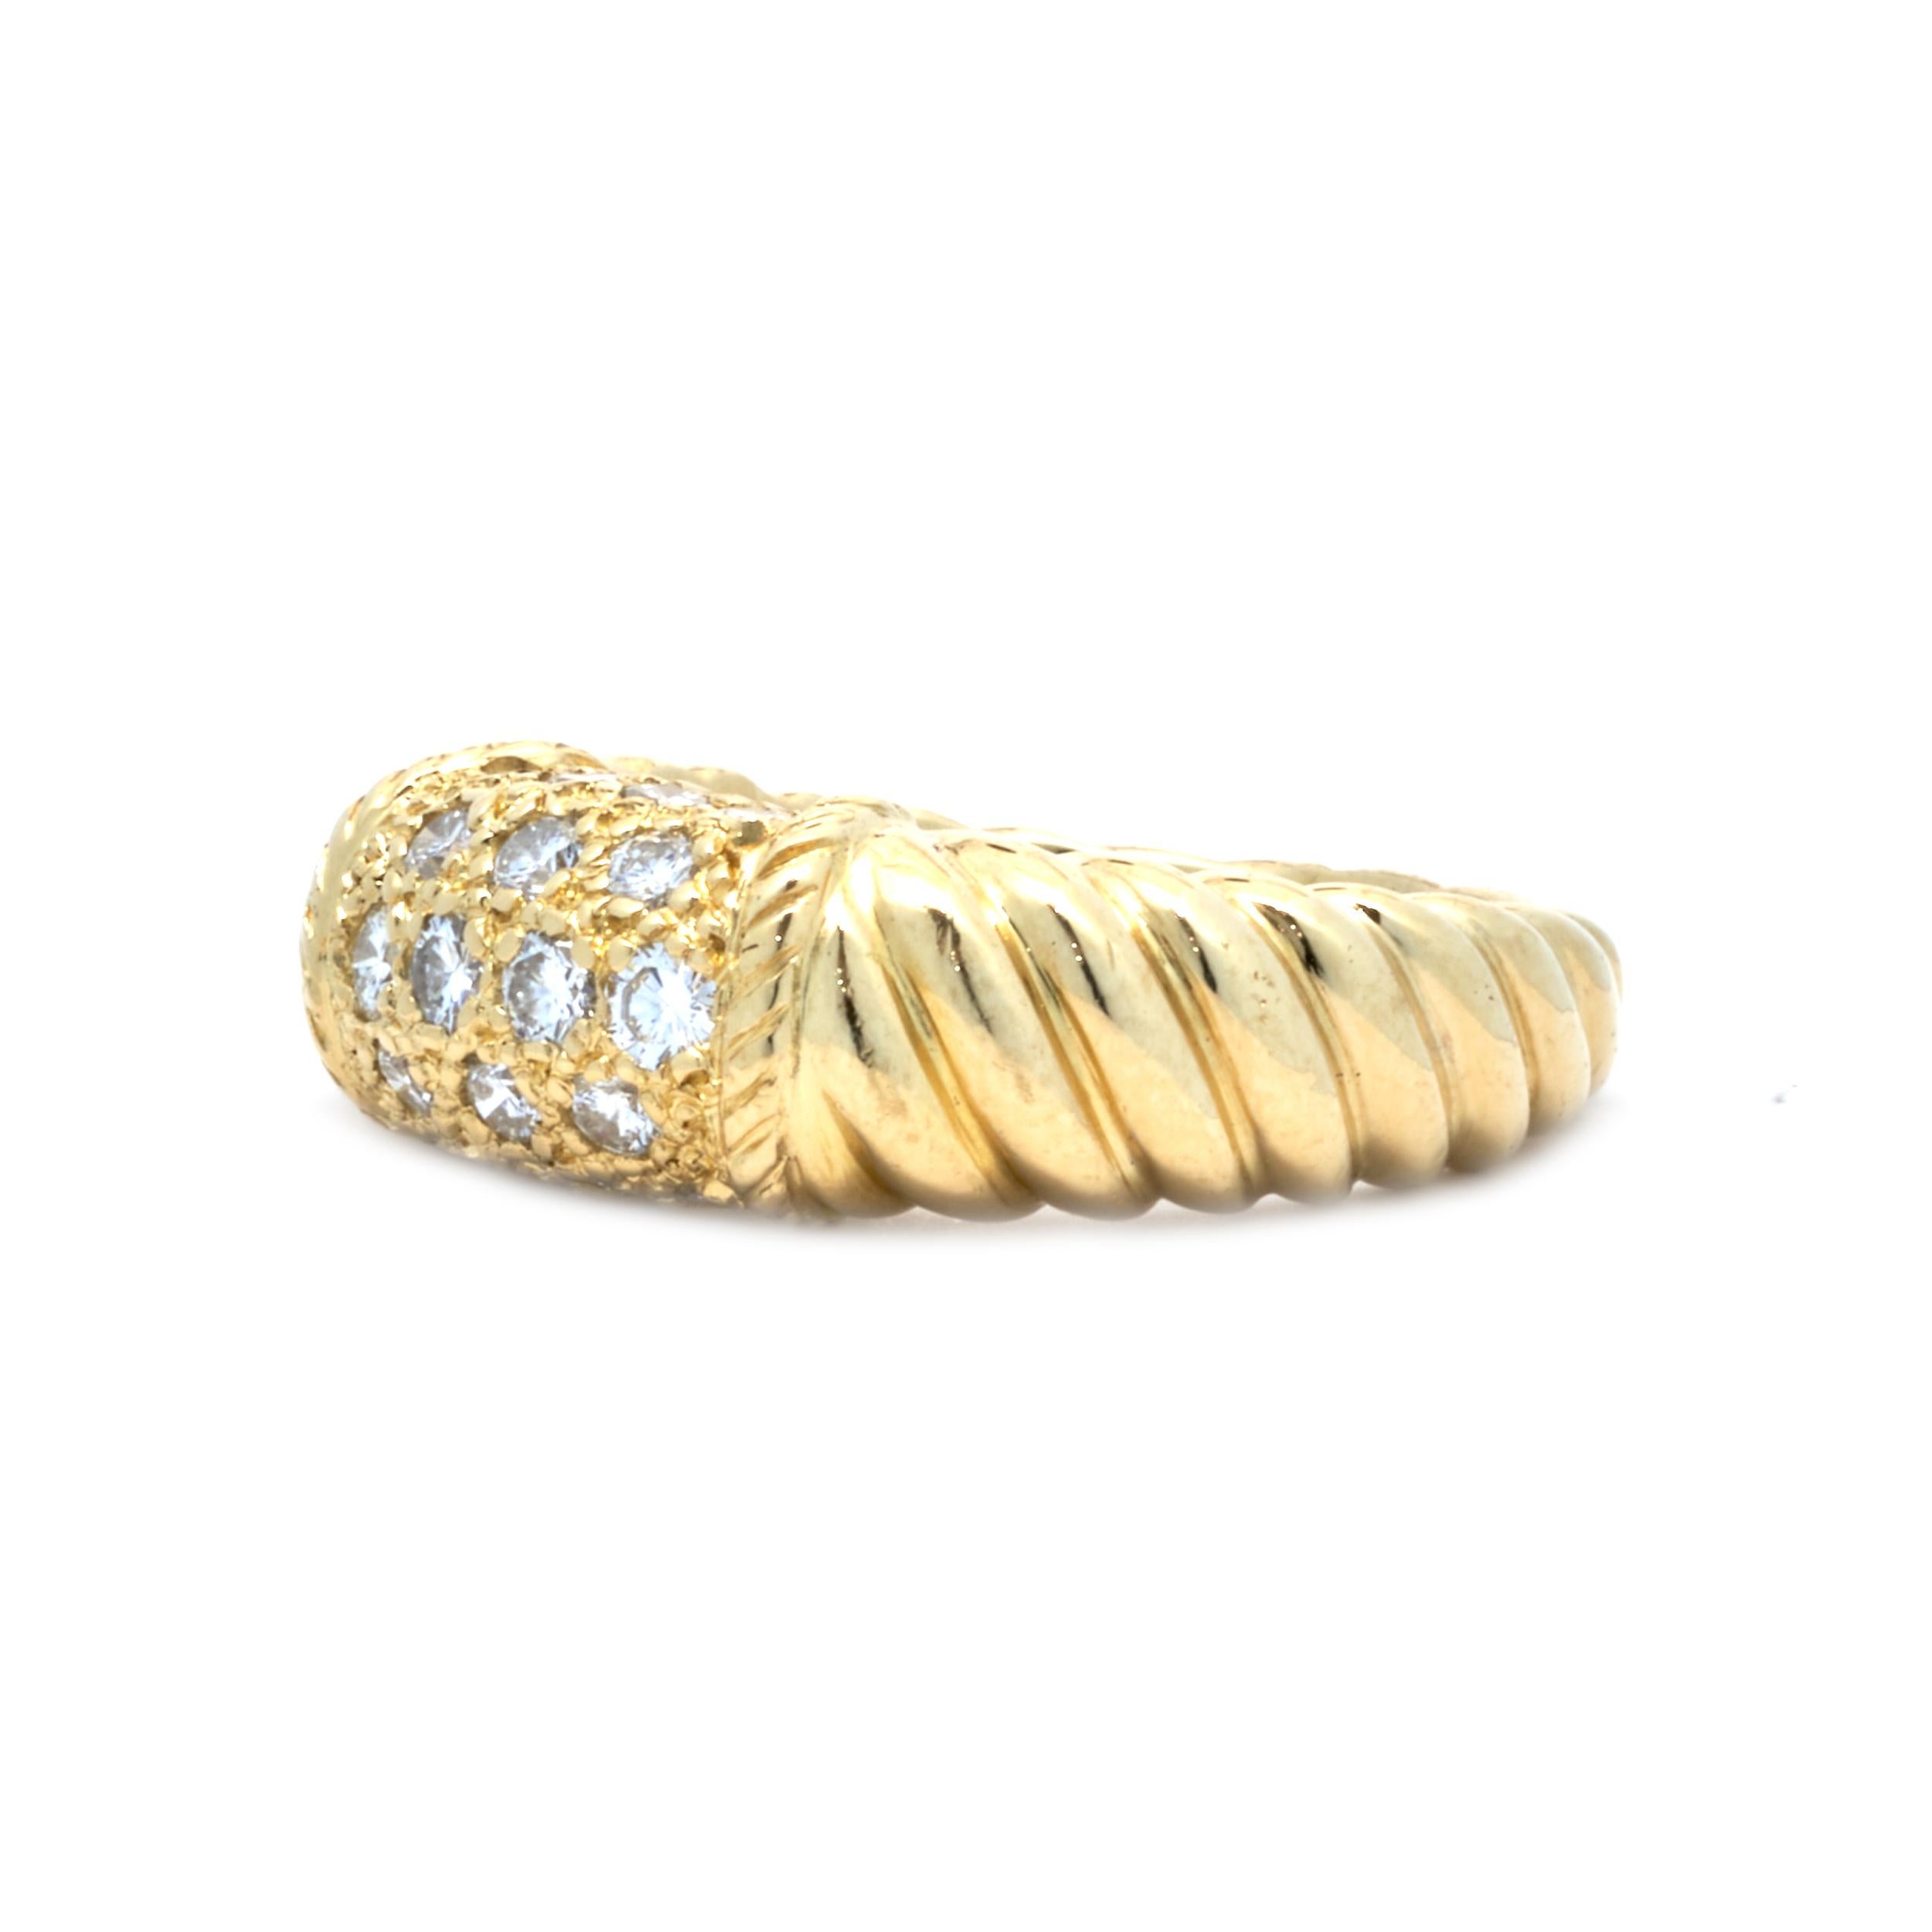 Designer: Van Cleef & Arpels
Material: 18K yellow gold
Diamond: 18 round brilliant cut = .54cttw
Color: H
Clarity: SI1
Weight: 7.36 grams
Size: 6.5 (please allow two additional days for complimentary sizing)
